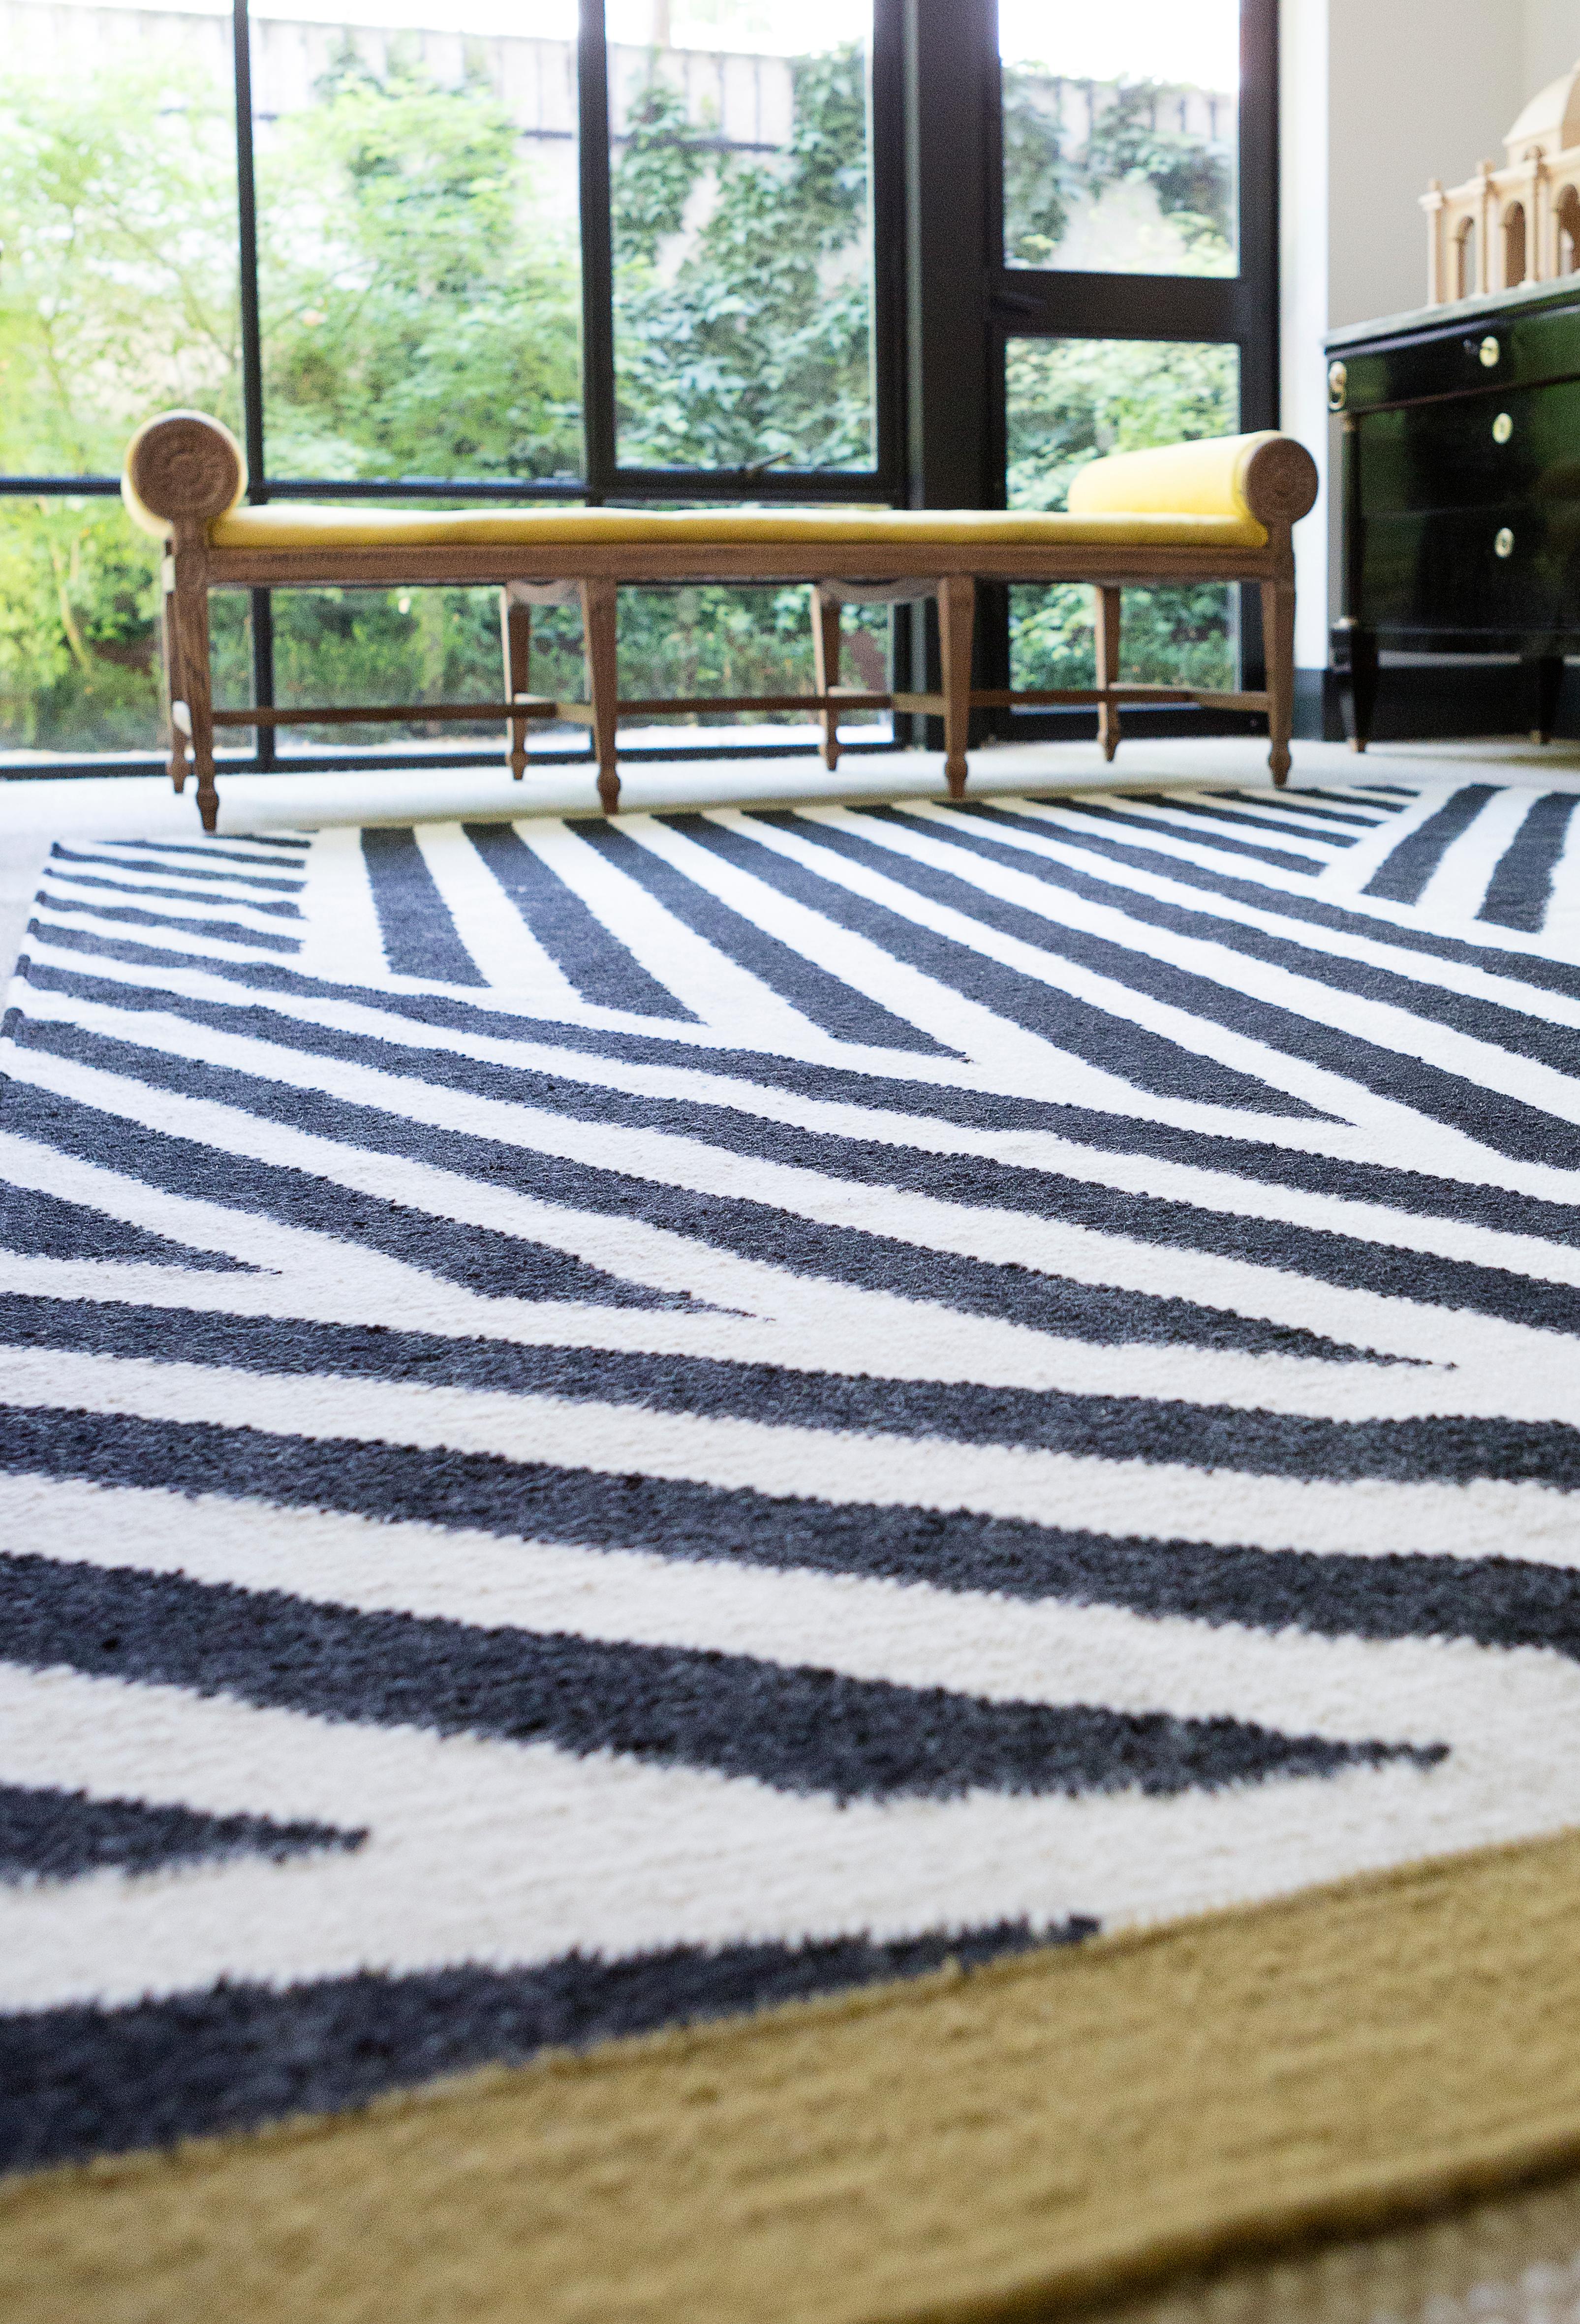 Café is a Luisa Olazábal's design for Kilombo Home. Luisa is a facmous Spanish interior designer

This rug has been ethically handwoven in the finest wool yarns by artisans in north of India, using a traditional weaving technique which is native of